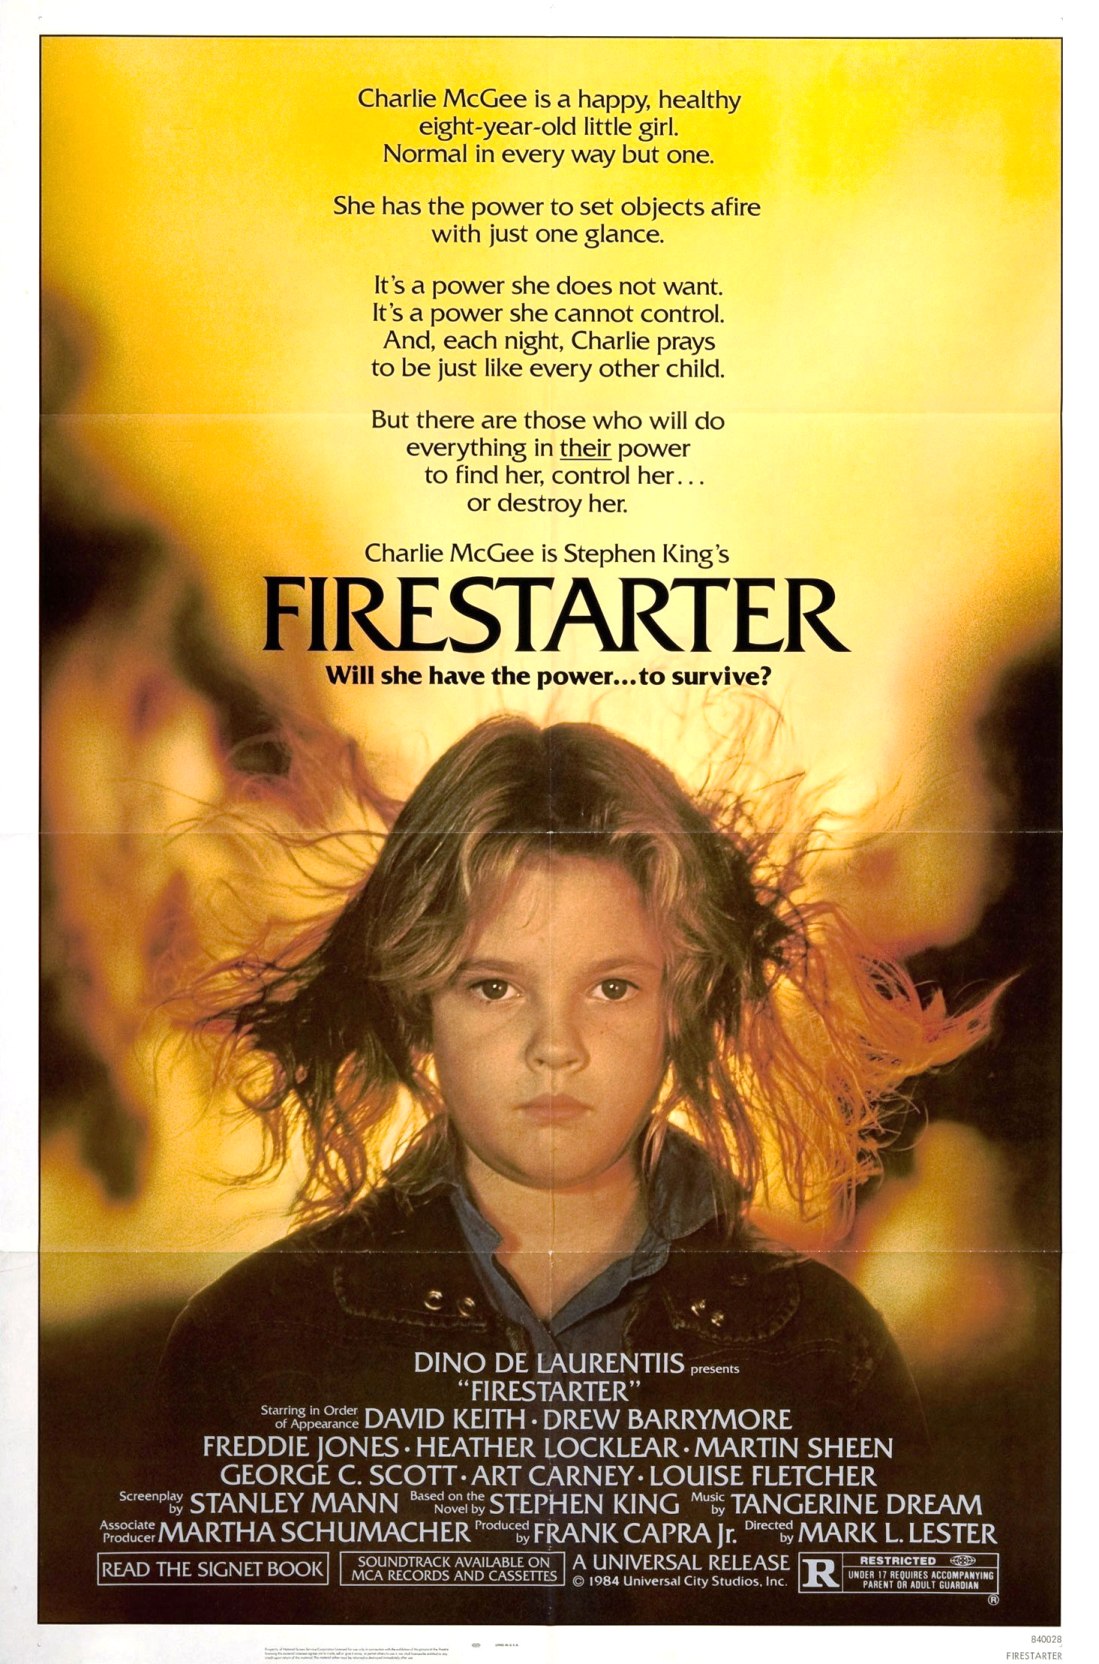 Triple Feature: FIRESTARTER, CARRIE, THE DEAD ZONE at Aero Theatre